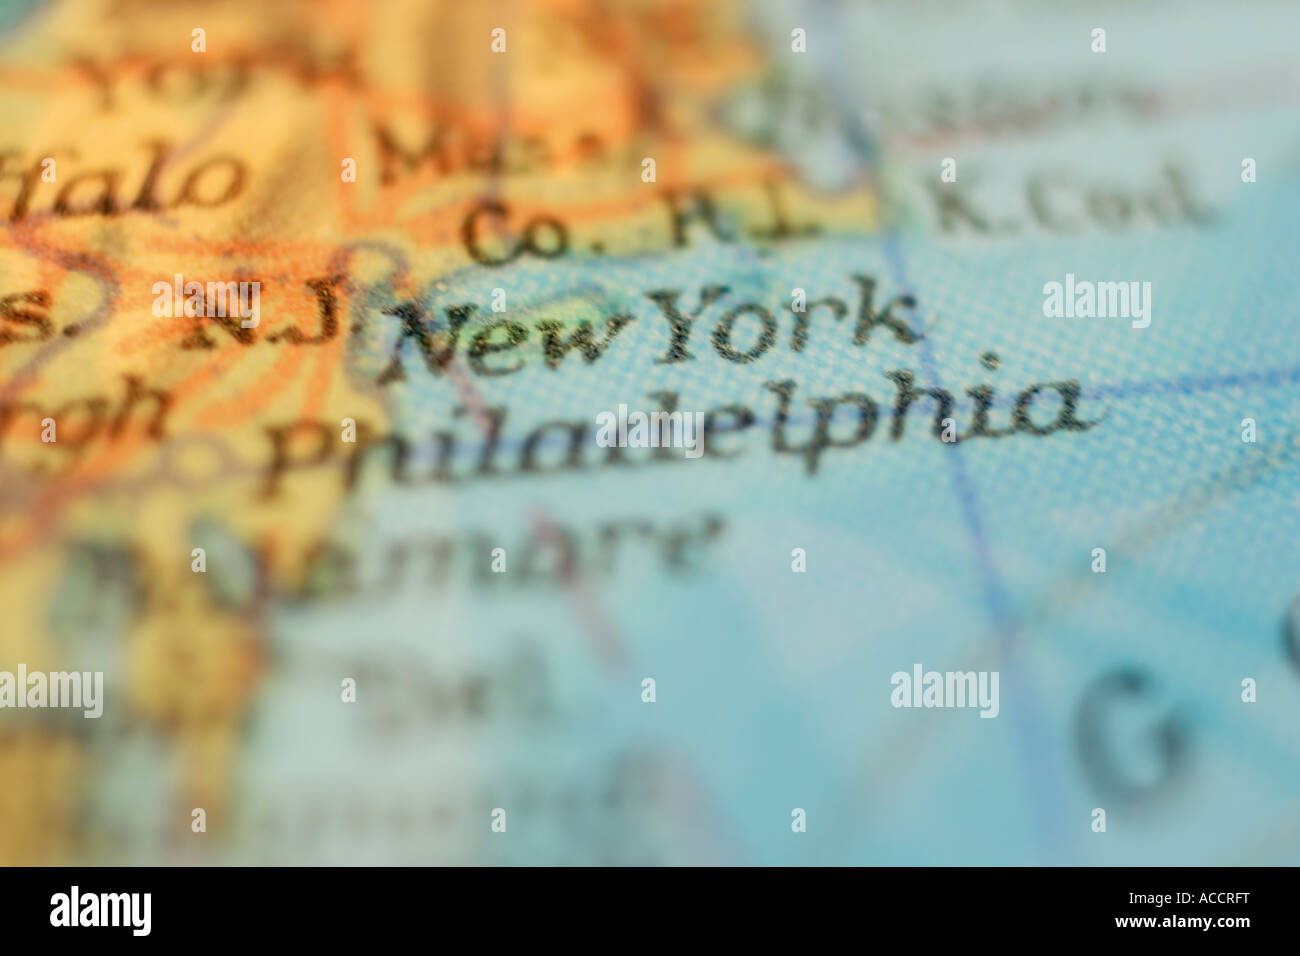 Detail of a globe with writing New York, full frame, selective focus Stock Photo